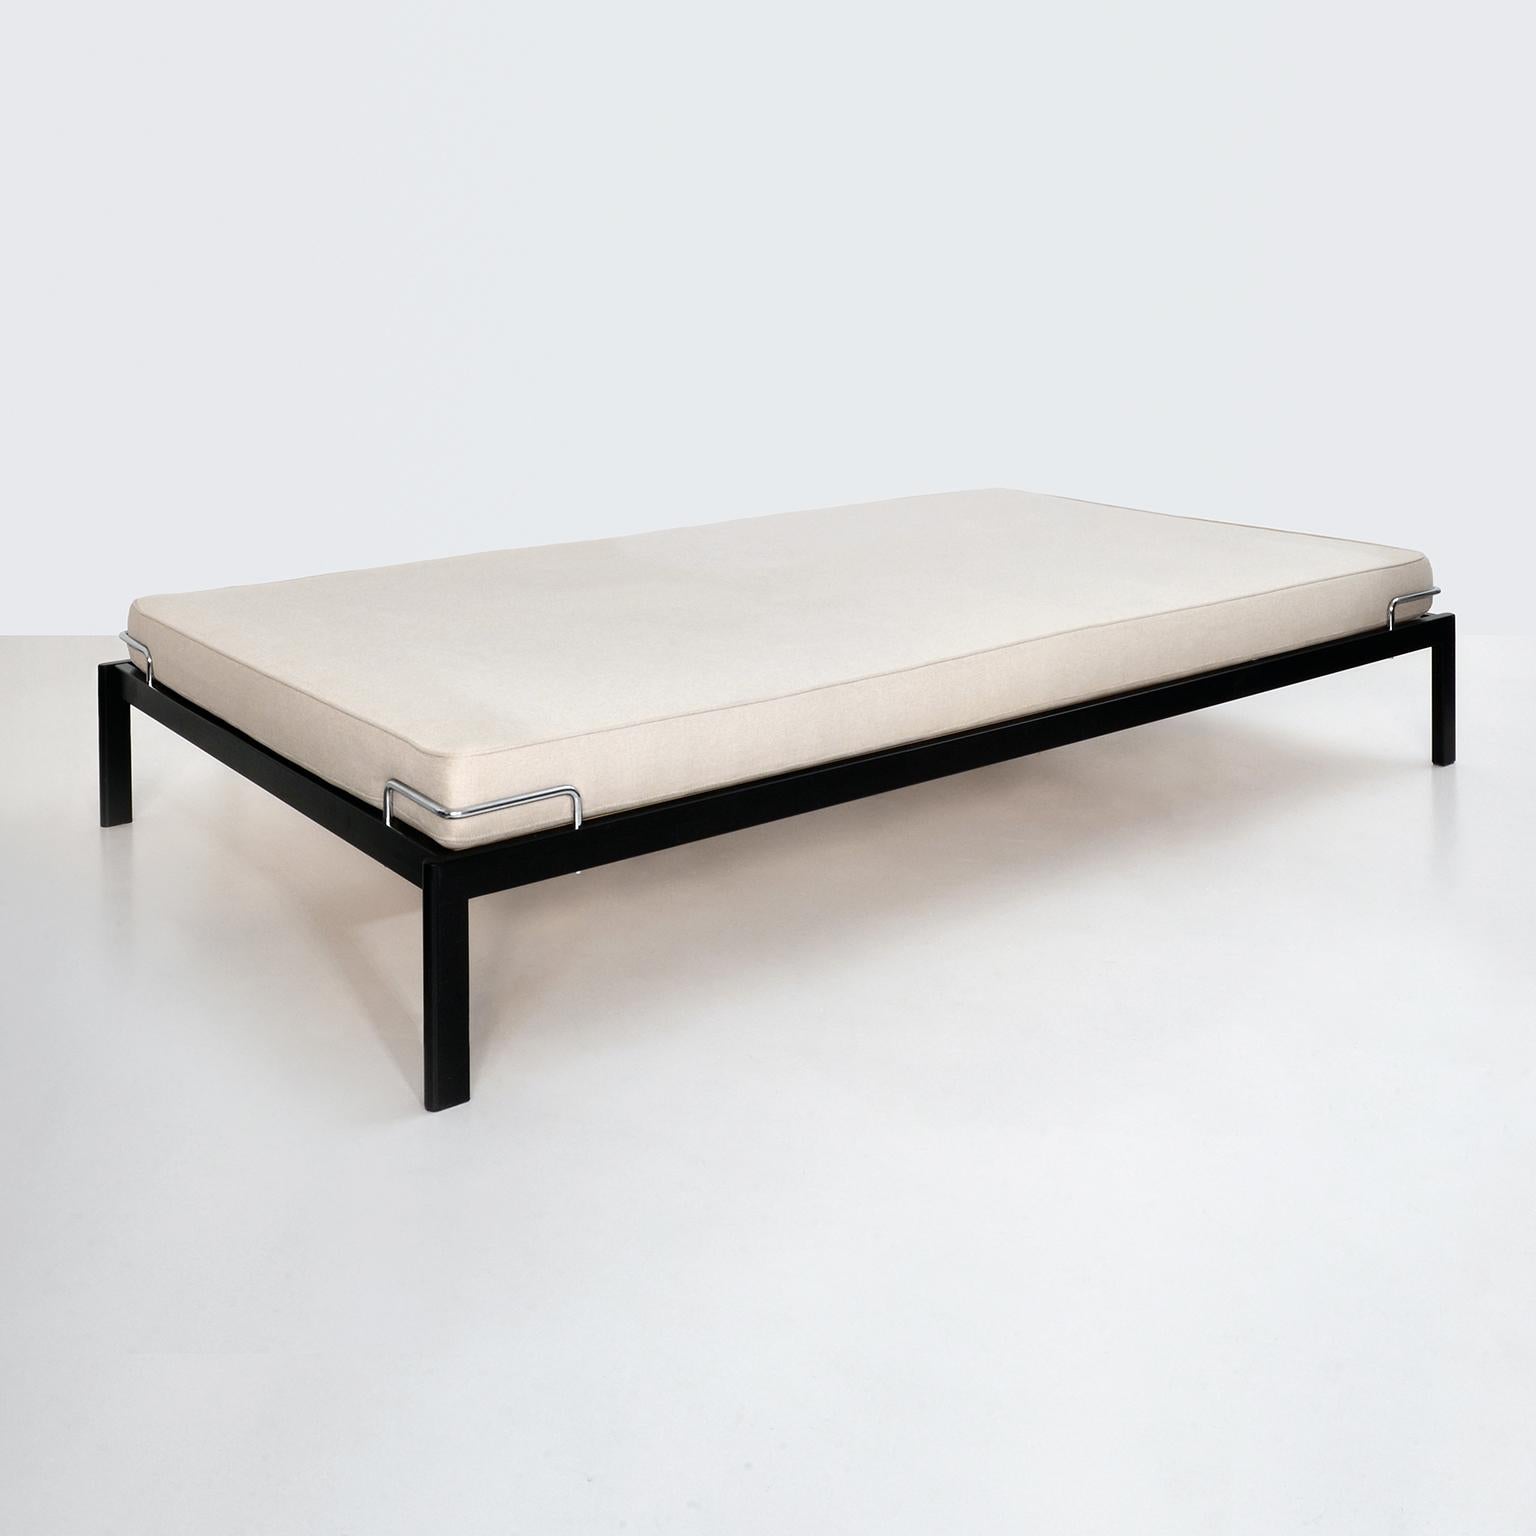 Minimalist and functional platform bed in black painted metal with four chromium plated mattress holders. The mattress platform is low and made in plywood board, the headboard is adjustable. Manufactured by Lehni, Switzerland, circa